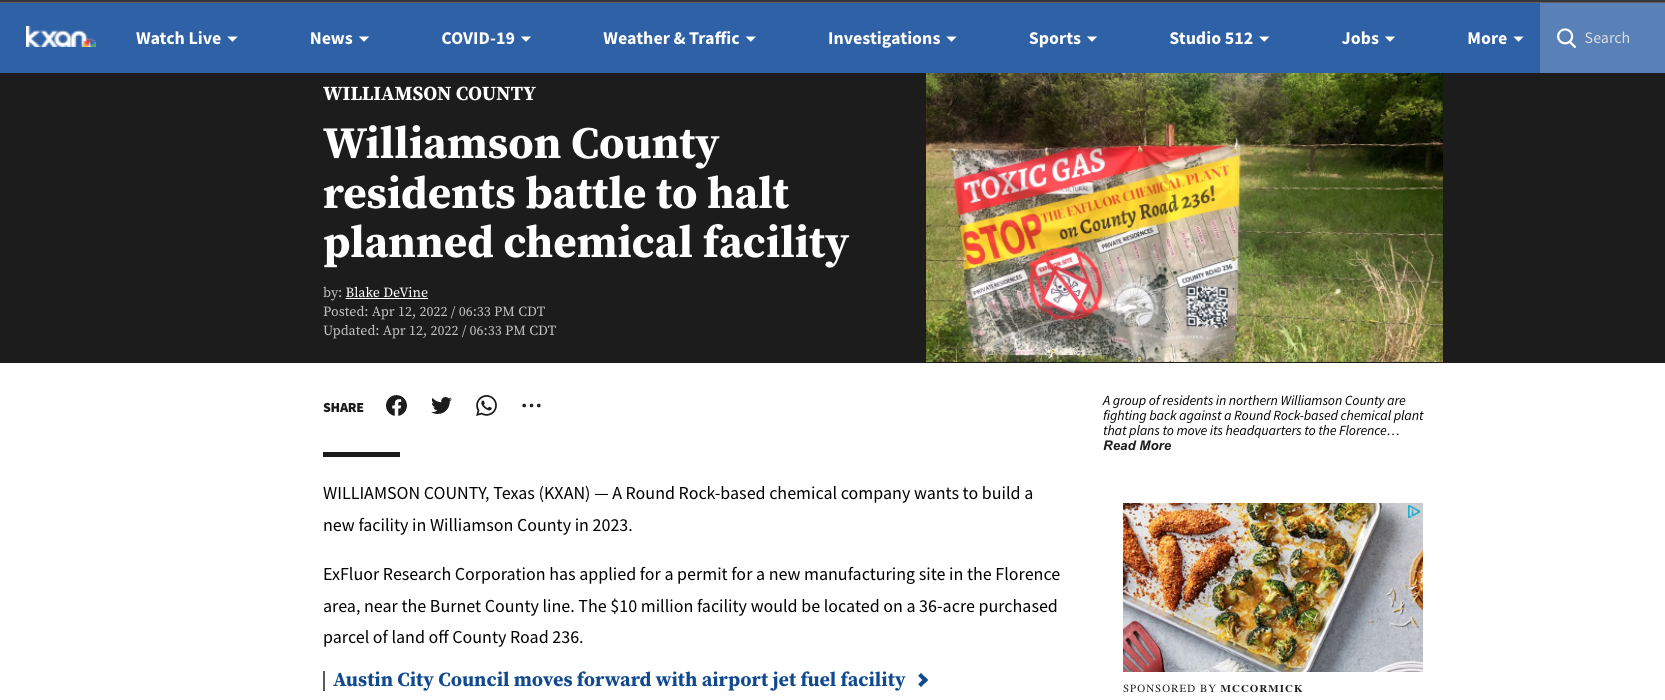 Read Blake Devine's full article on the KXAN website here: Williamson County residents battle to halt planned chemical facility